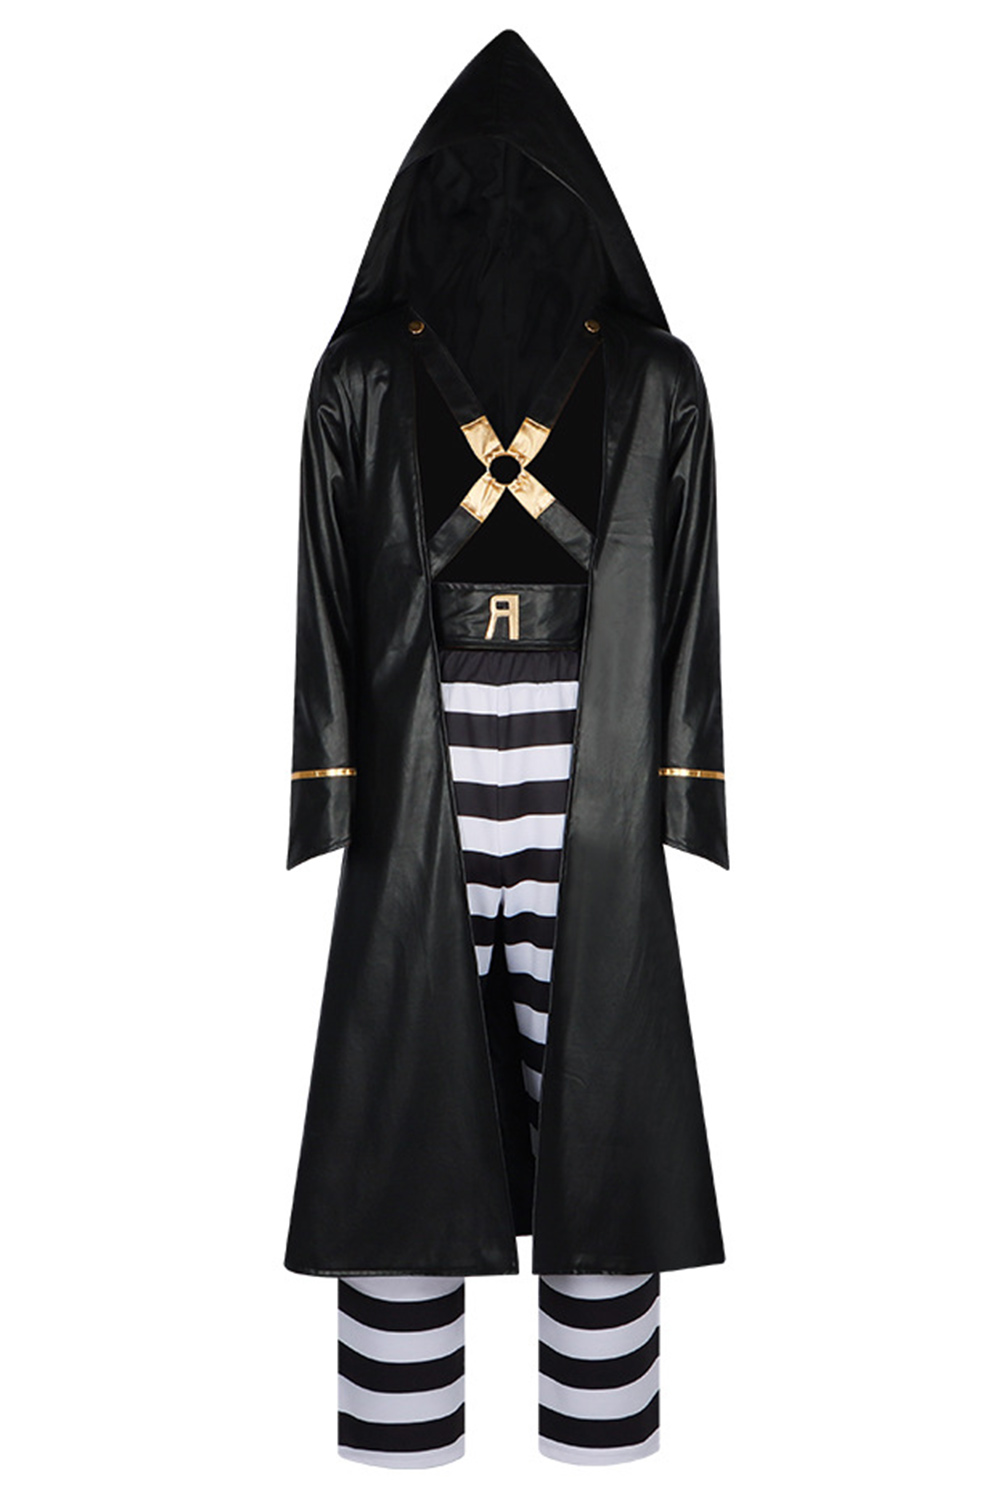 Anime JoJo's Bizarre Adventure Risotto Nero Outfits Halloween Carnival Suit Cosplay Costume